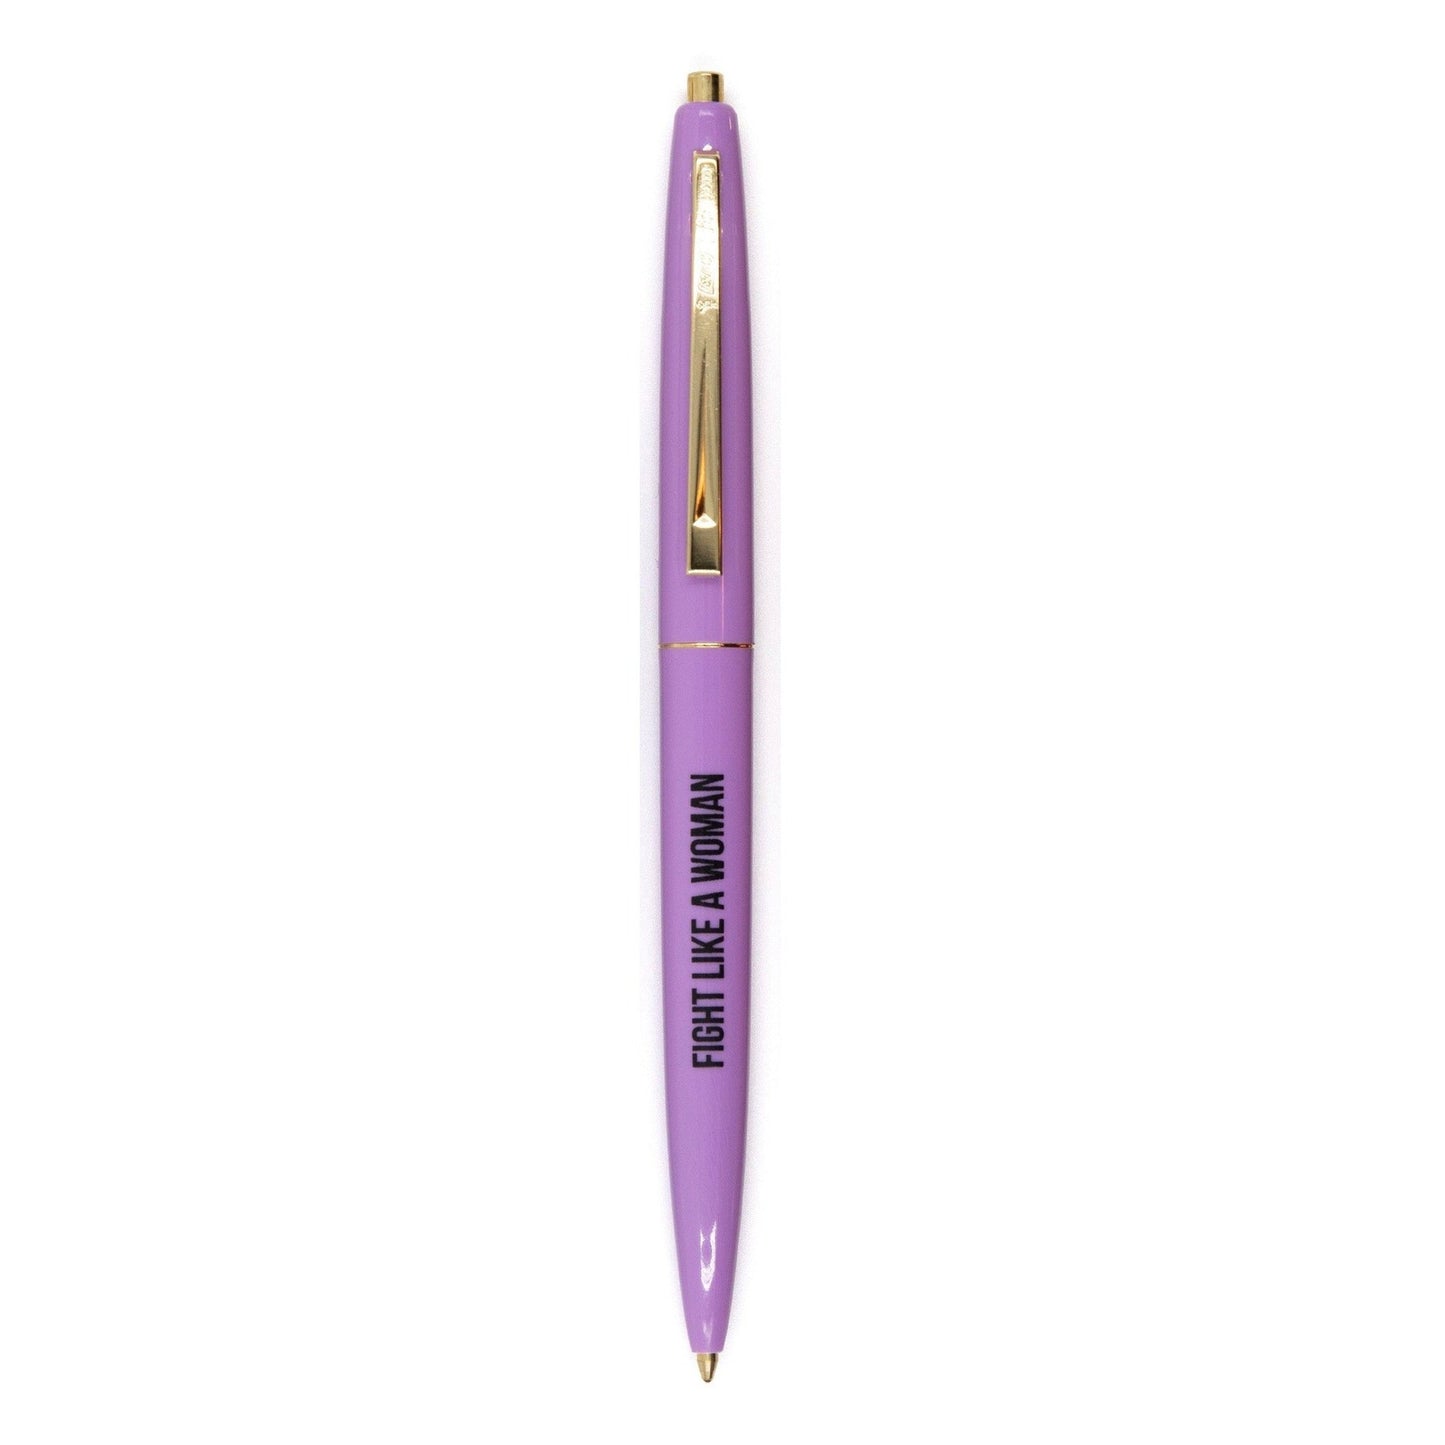 Fight Like A Woman Pen in Purple with Gold Accents